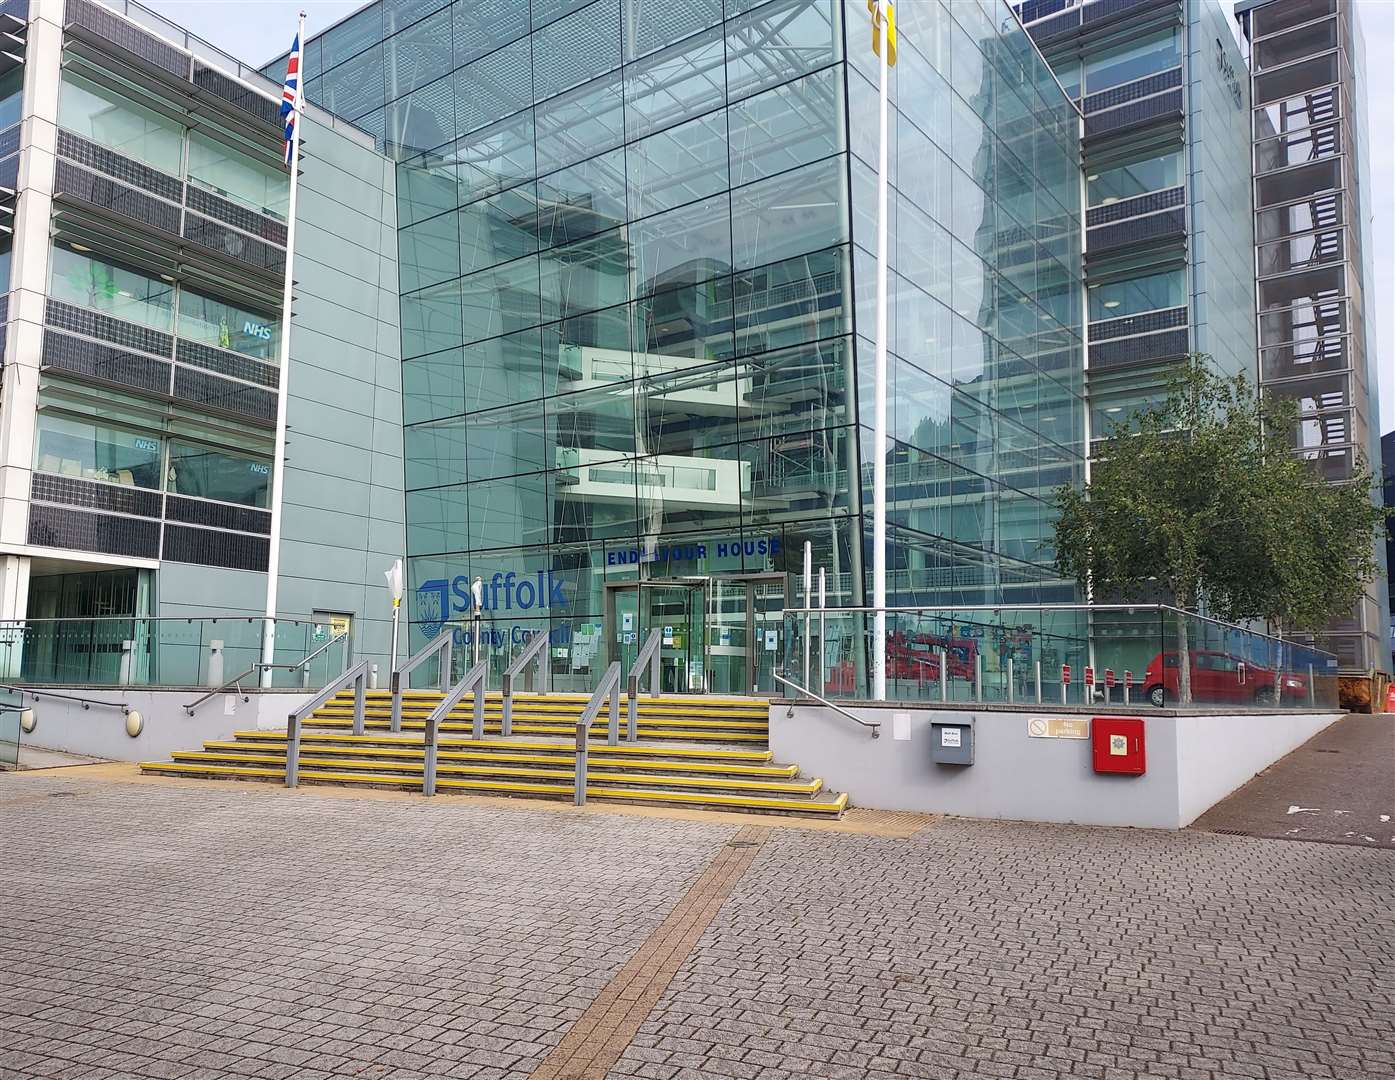 Suffolk County Council, Endeavour House, Ipswich